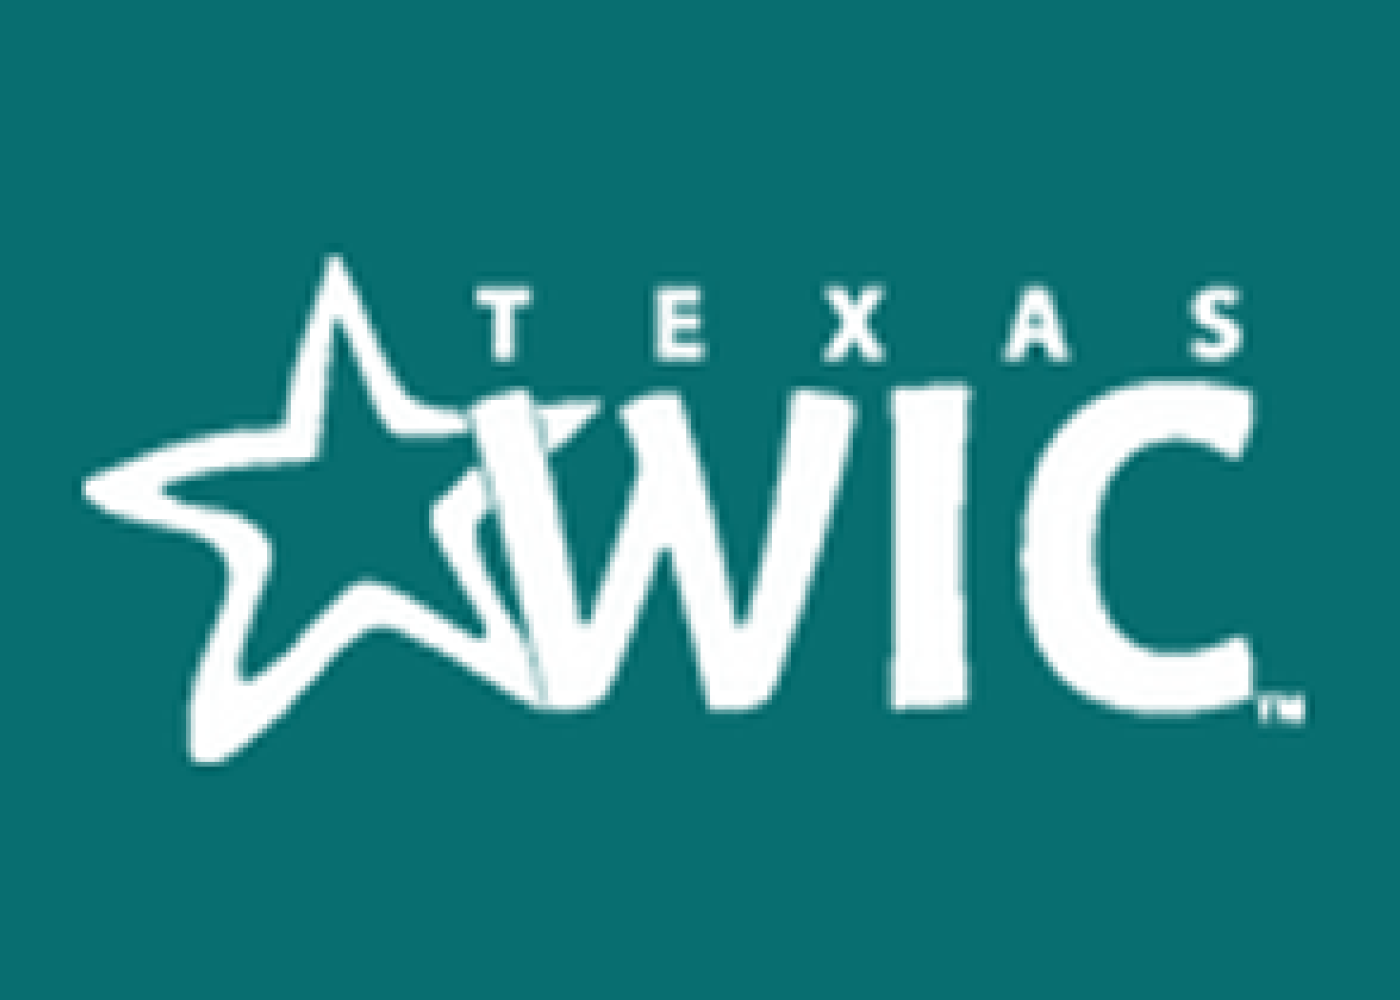 Texas WIC with a green background